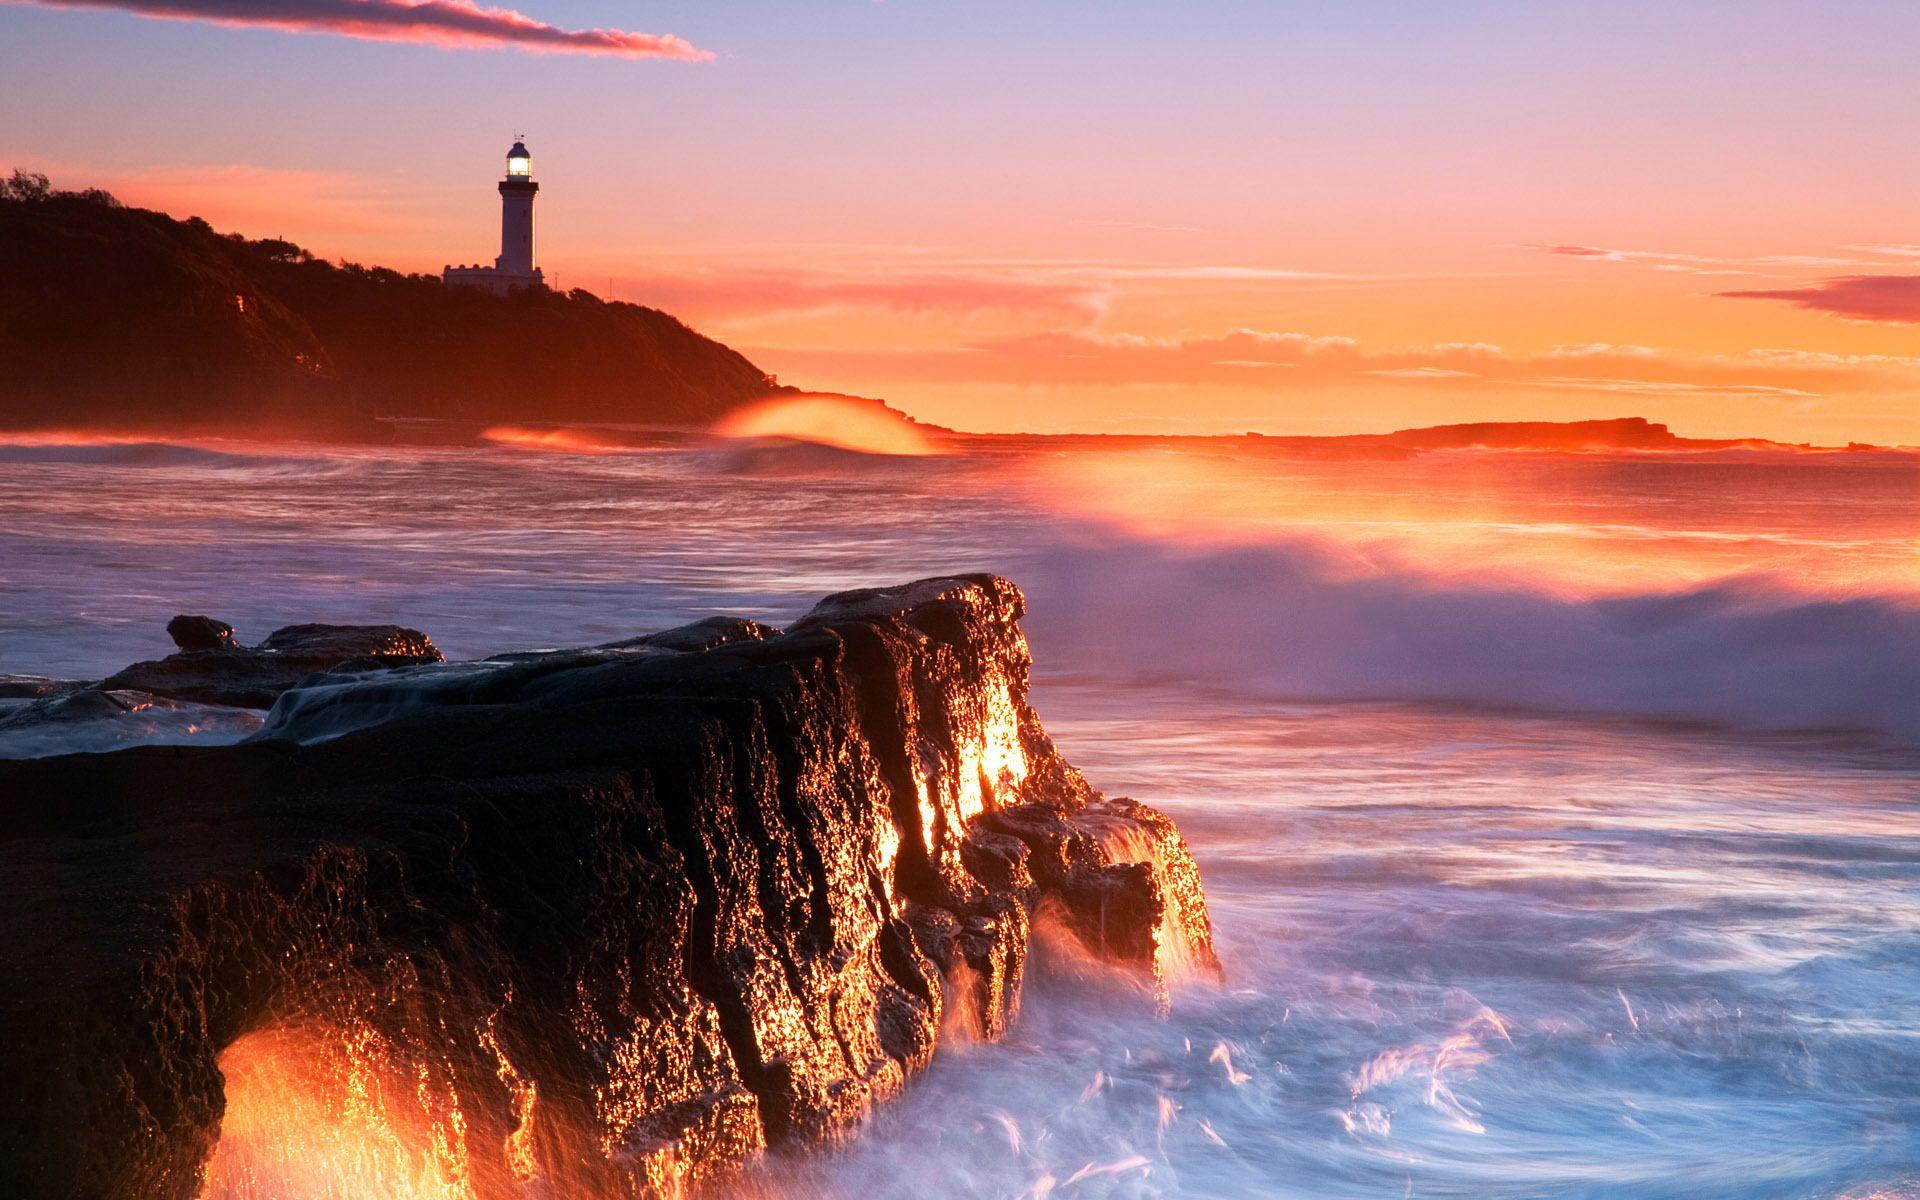 Download Lighthouse Sunset Wallpaper High Quality Is Cool Wallpaper